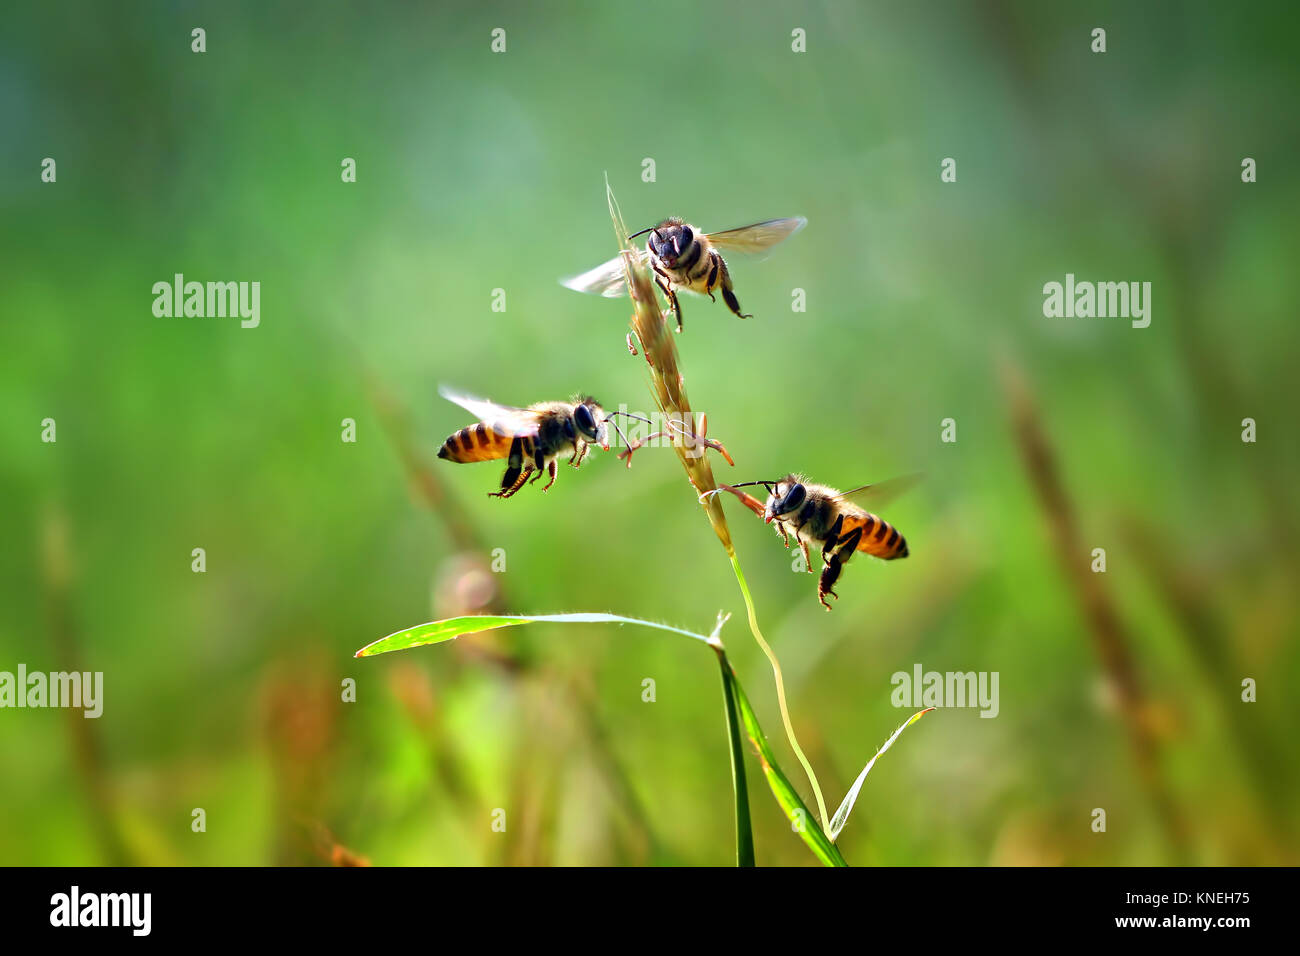 Three honey bees hovering by a blade of grass Stock Photo